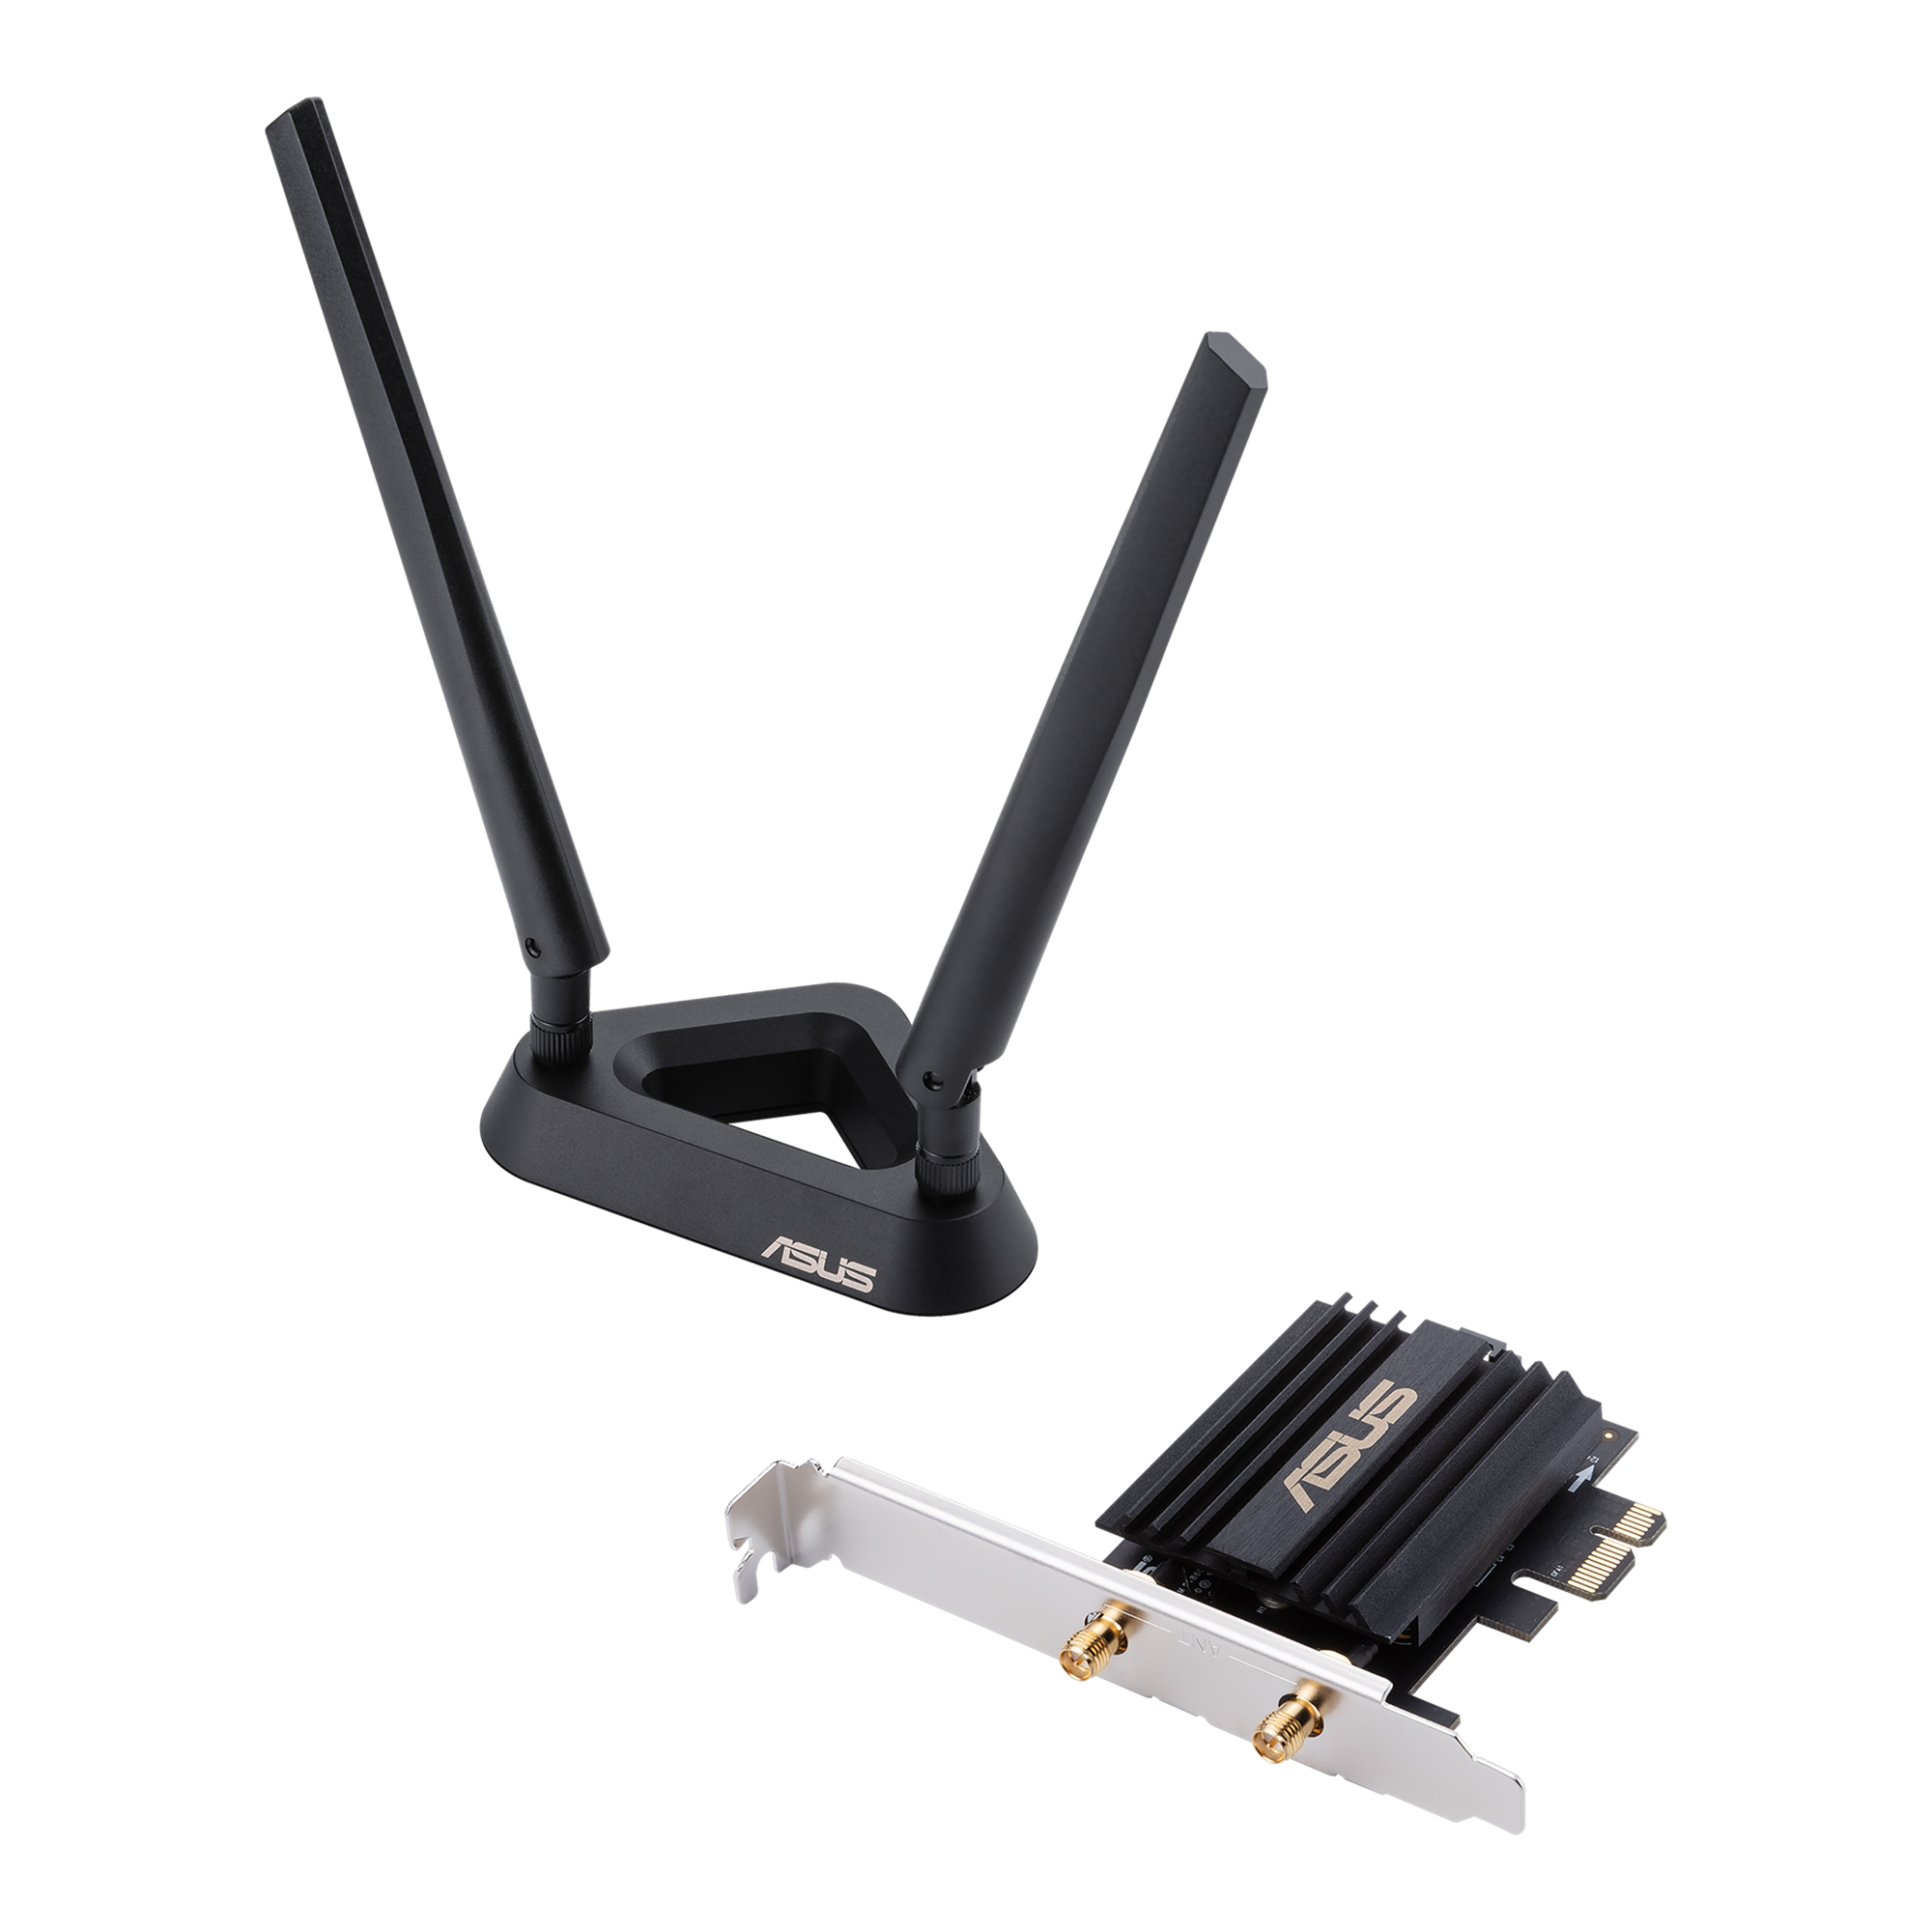 PCE-AX58BT｜Adapters｜ASUS Global